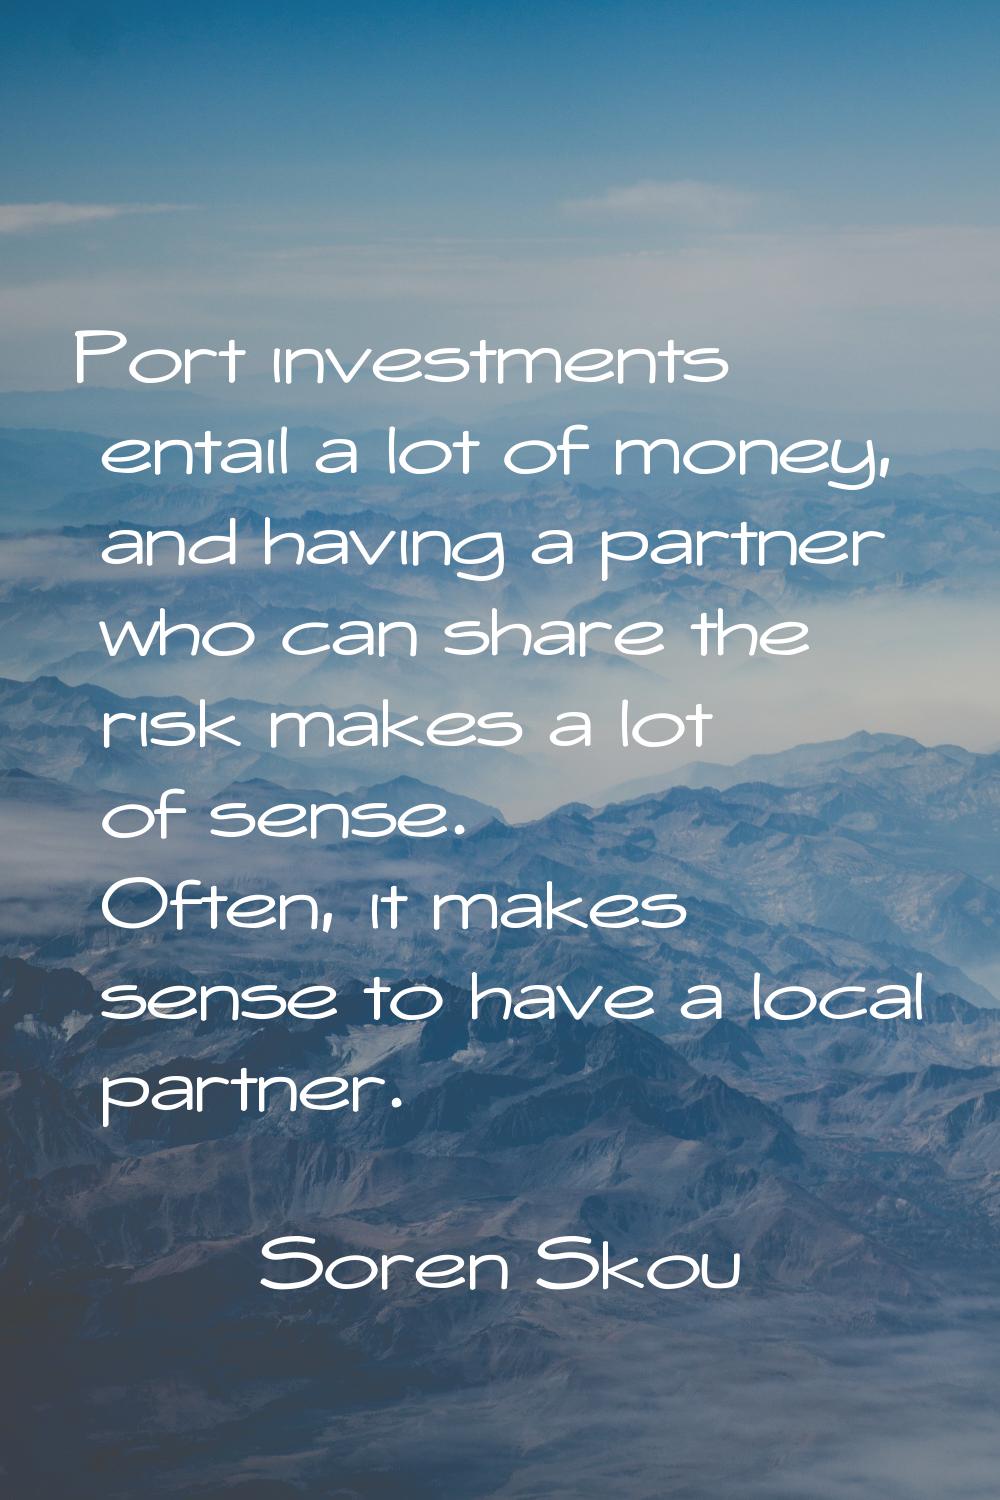 Port investments entail a lot of money, and having a partner who can share the risk makes a lot of 